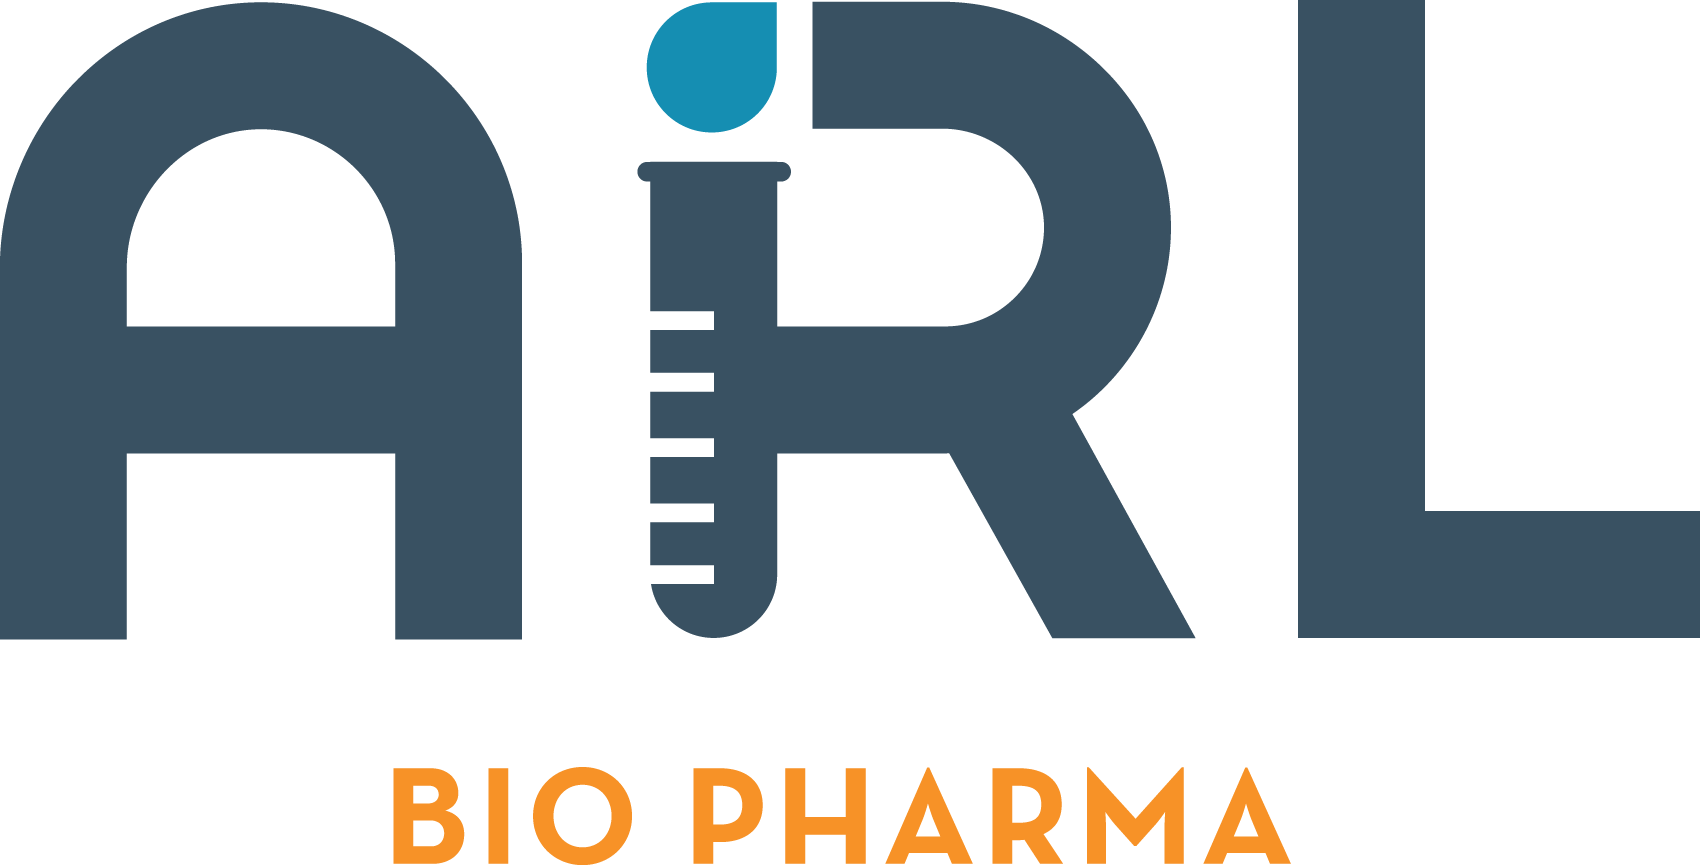 ARL Bio Pharma - ARL Bio Pharma is a contract laboratory that provides analytical and microbiological testing for the